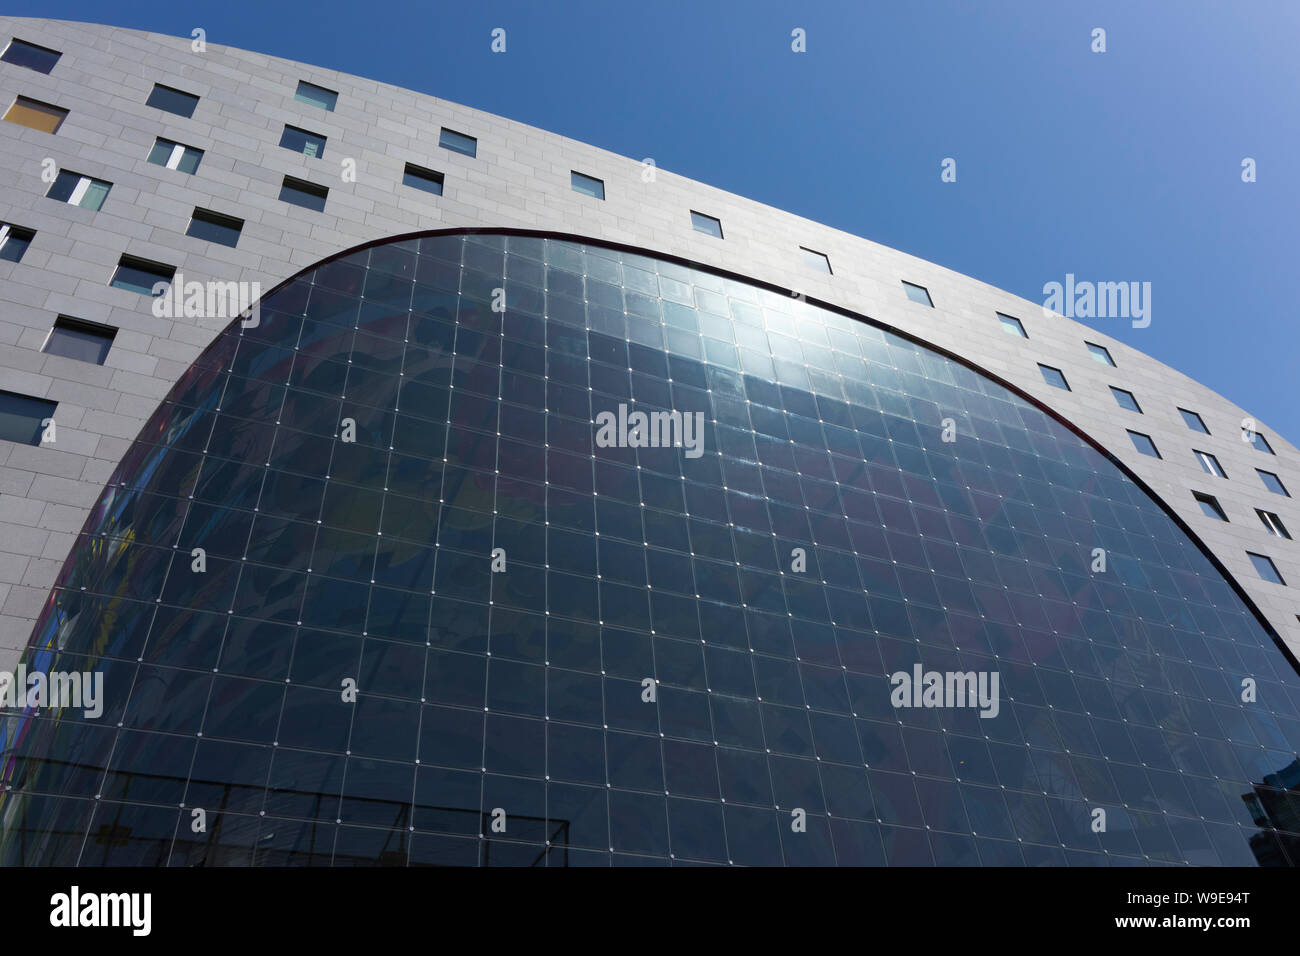 Rotterdam, Holland - July 30, 2019:  Facade of the Markthal building with glass windows Stock Photo